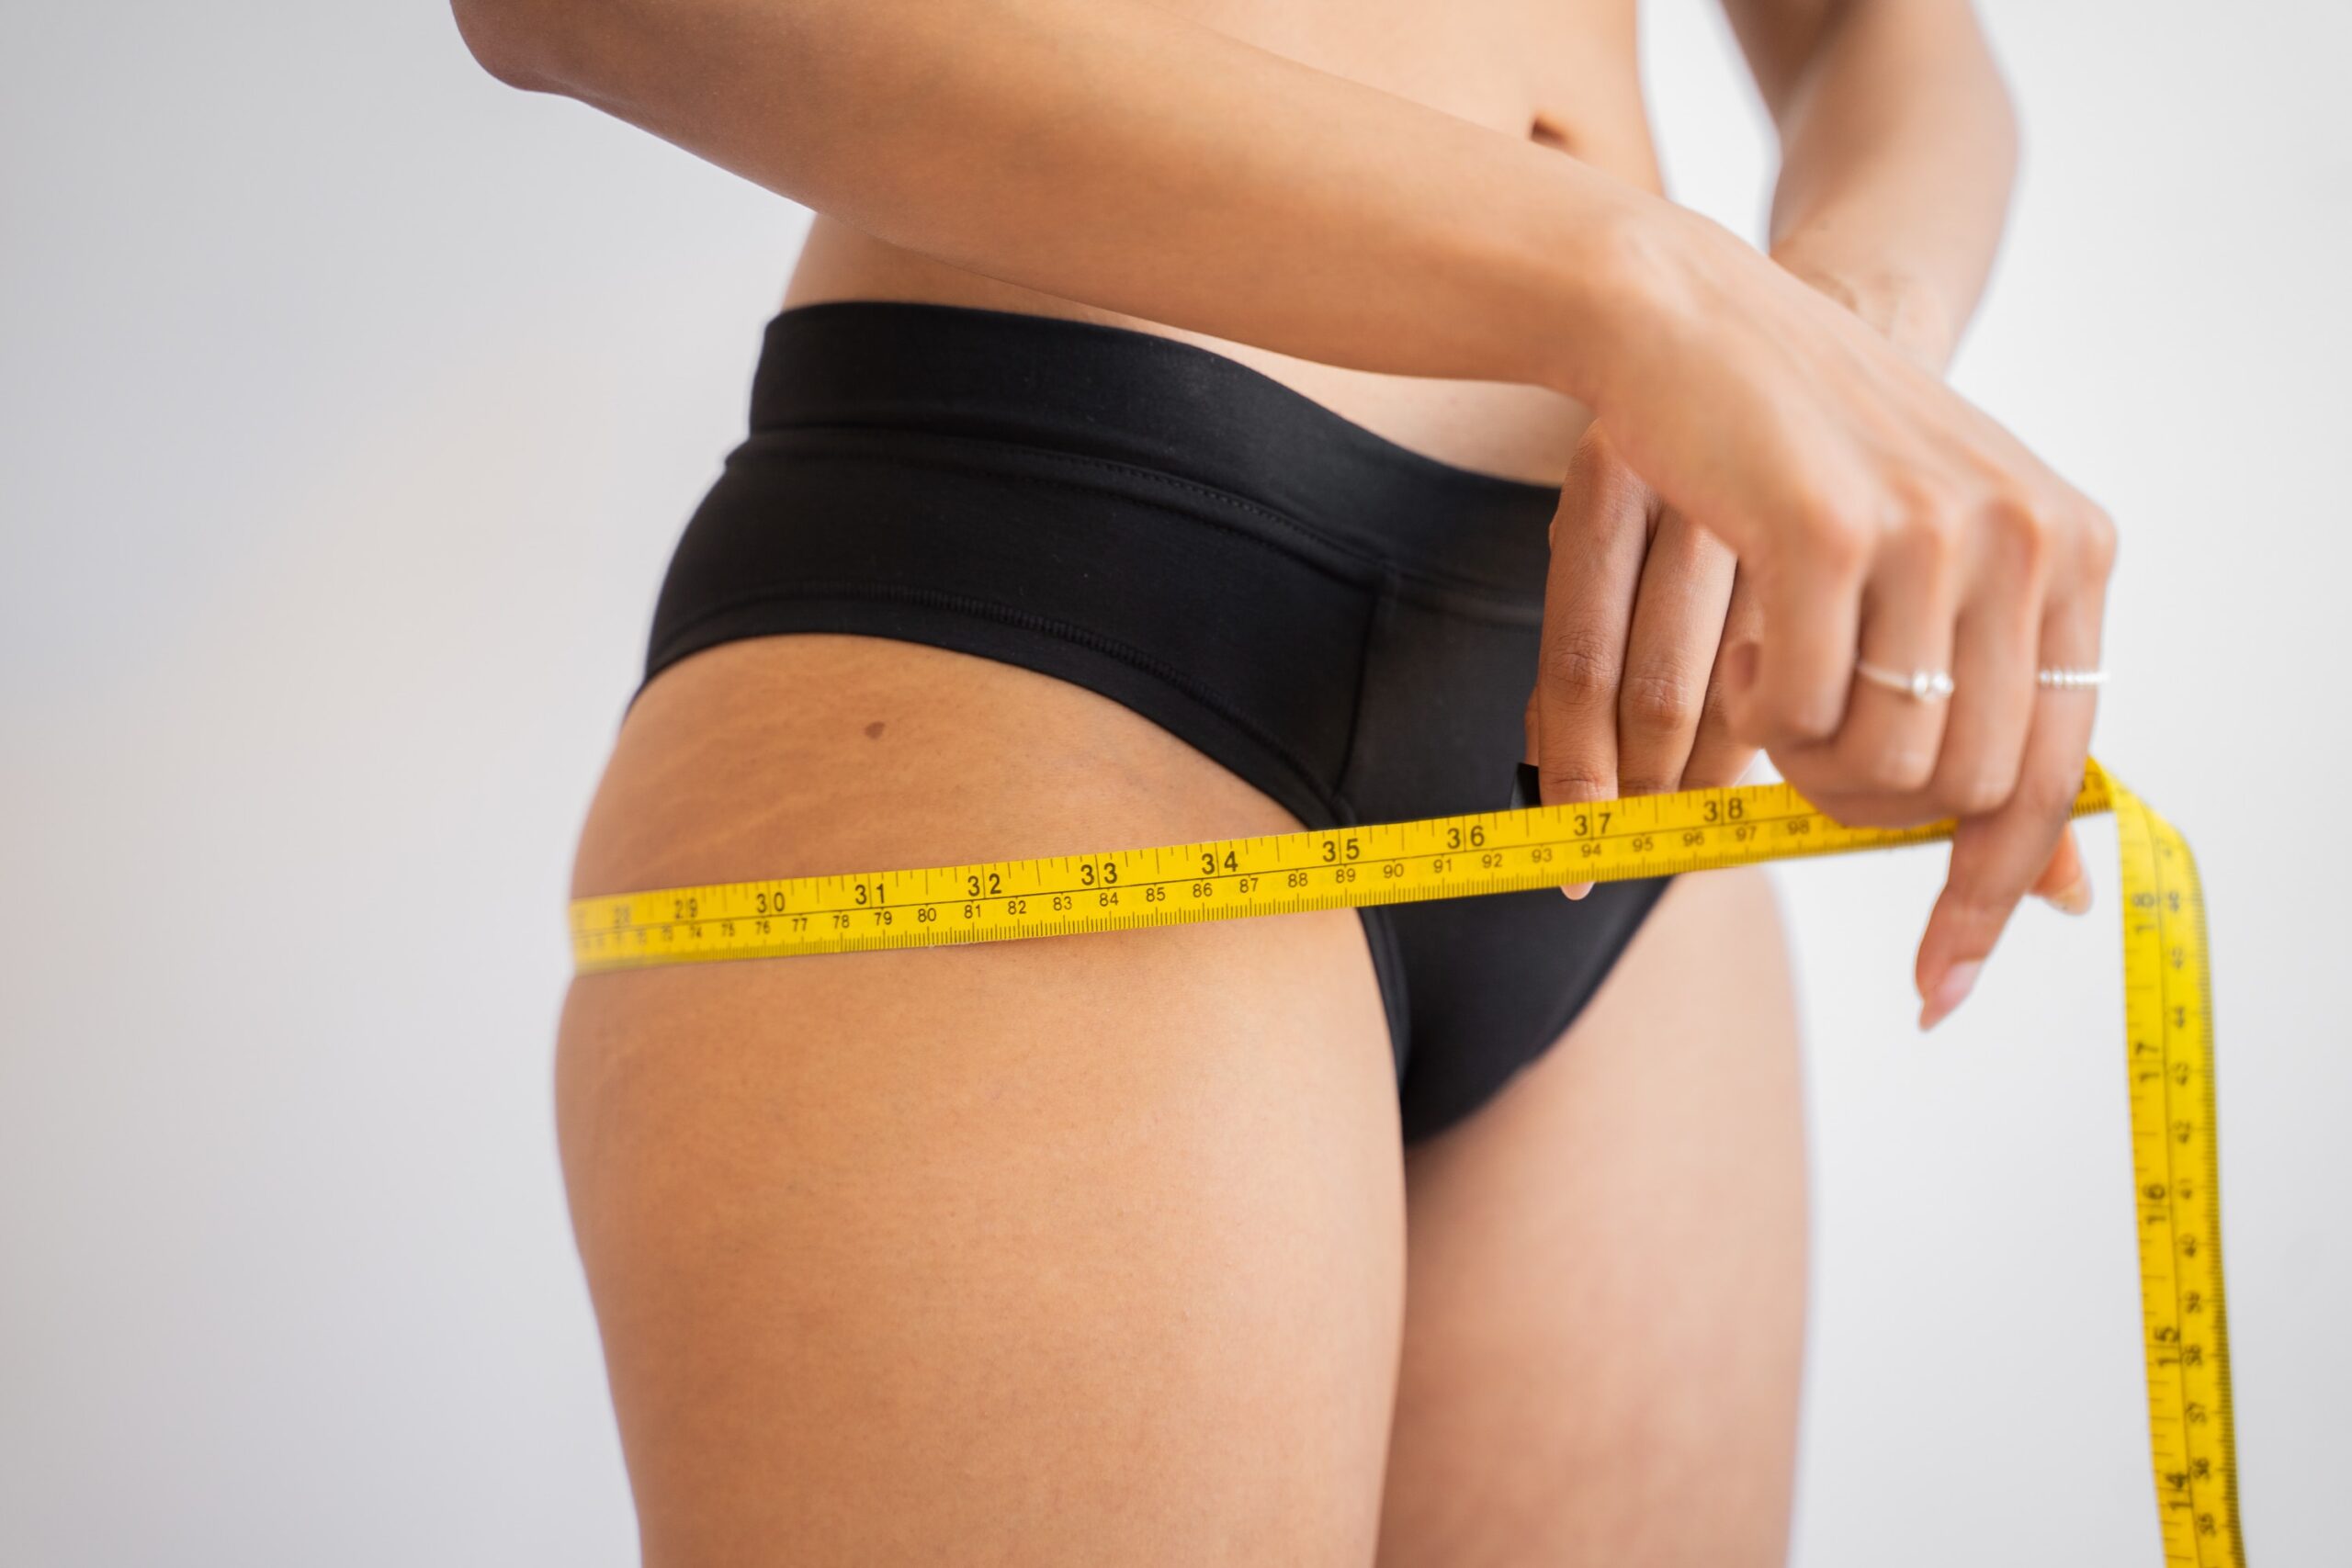 Signs That Your Weight Loss Goals Are Too Unrealistic